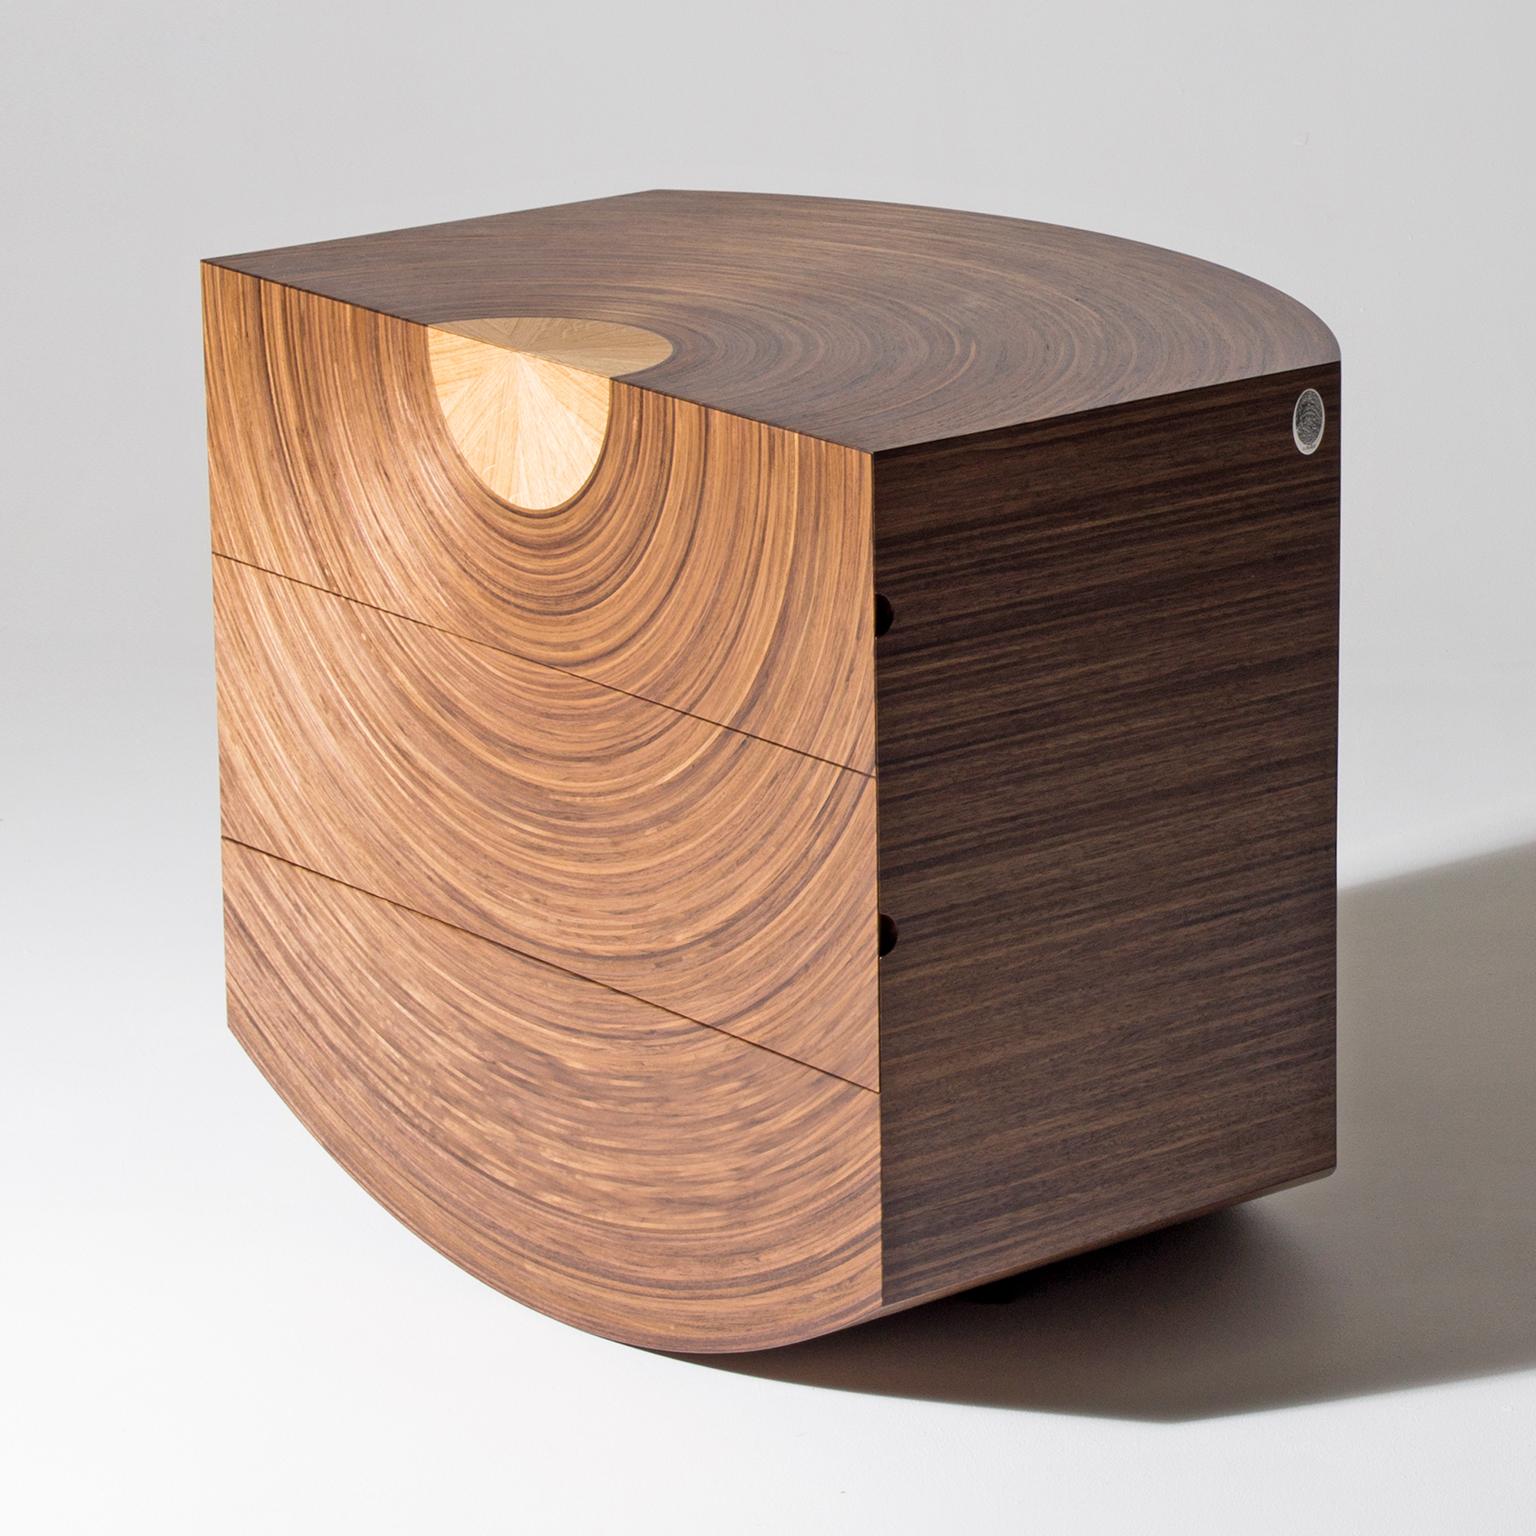 The contemporary ‘Centrum’ chest of drawers by Edward Johnson is made in walnut and oak. The walnut ‘Murano’ veneer radiates from a central star-burst oak core on the top and front. 

This delightful chest of drawers is all about symmetry and can